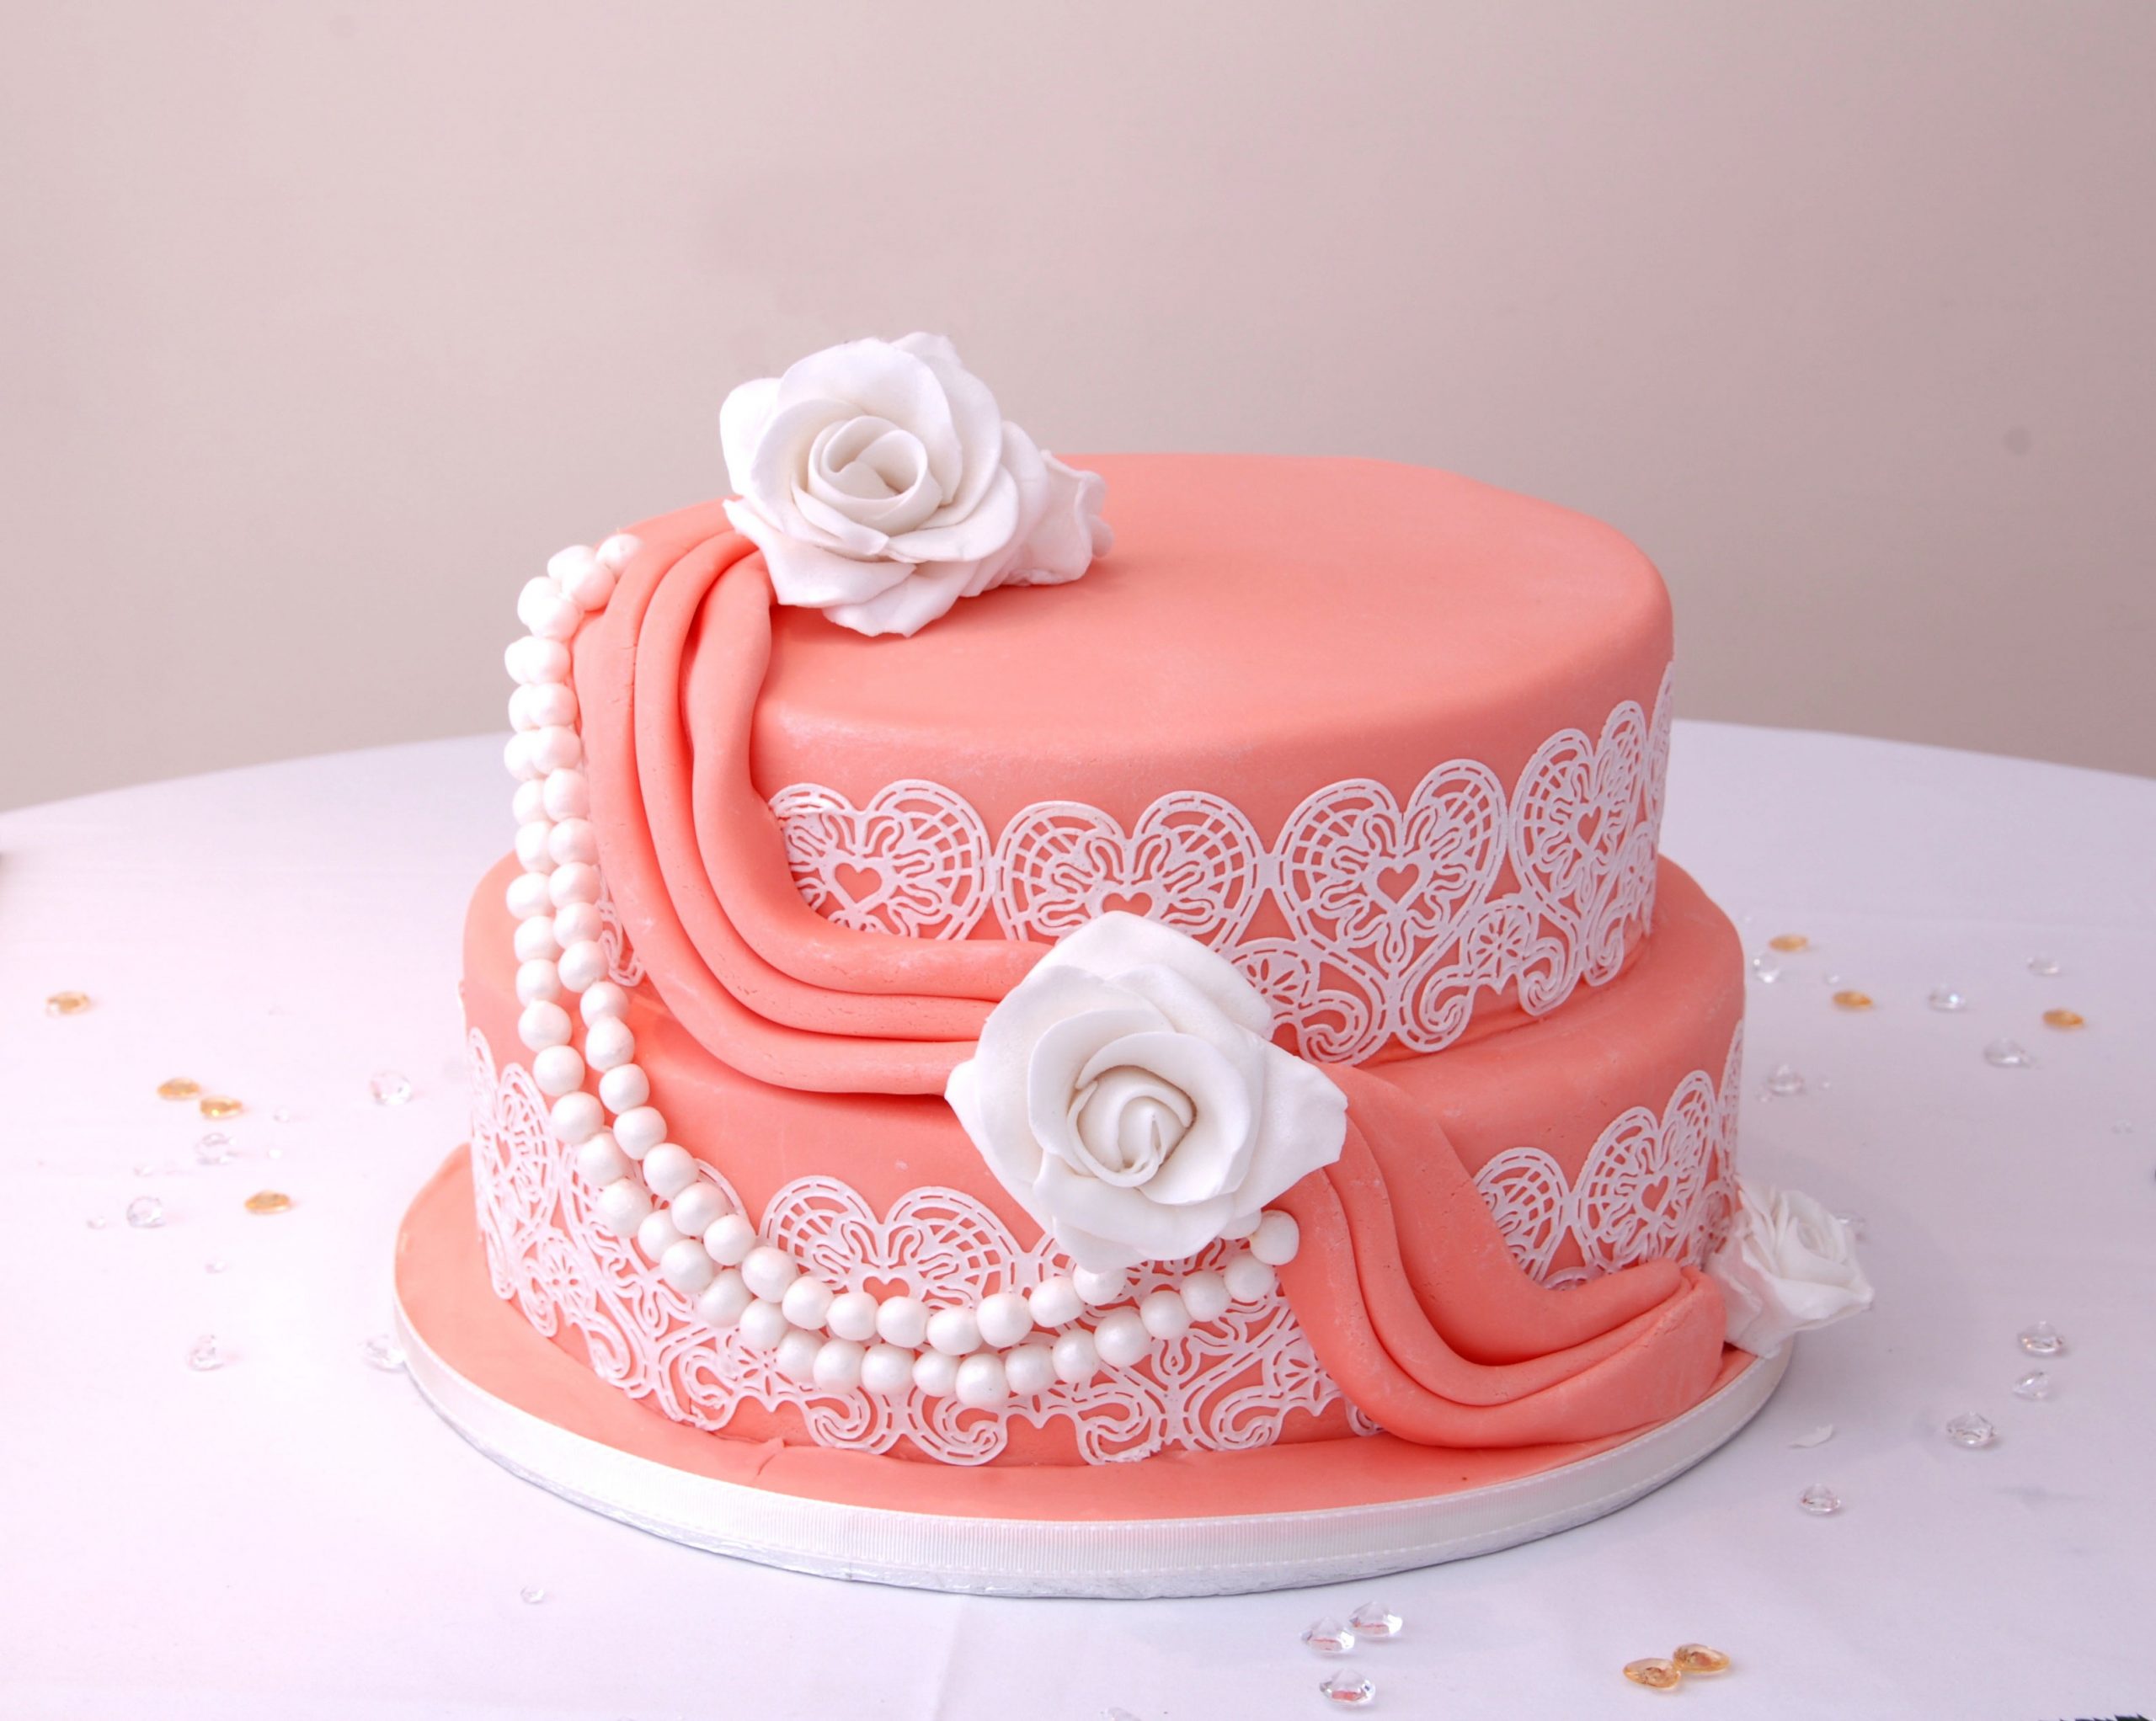 Wallpaper Two Layered Cake With Pink And White Icing, Party